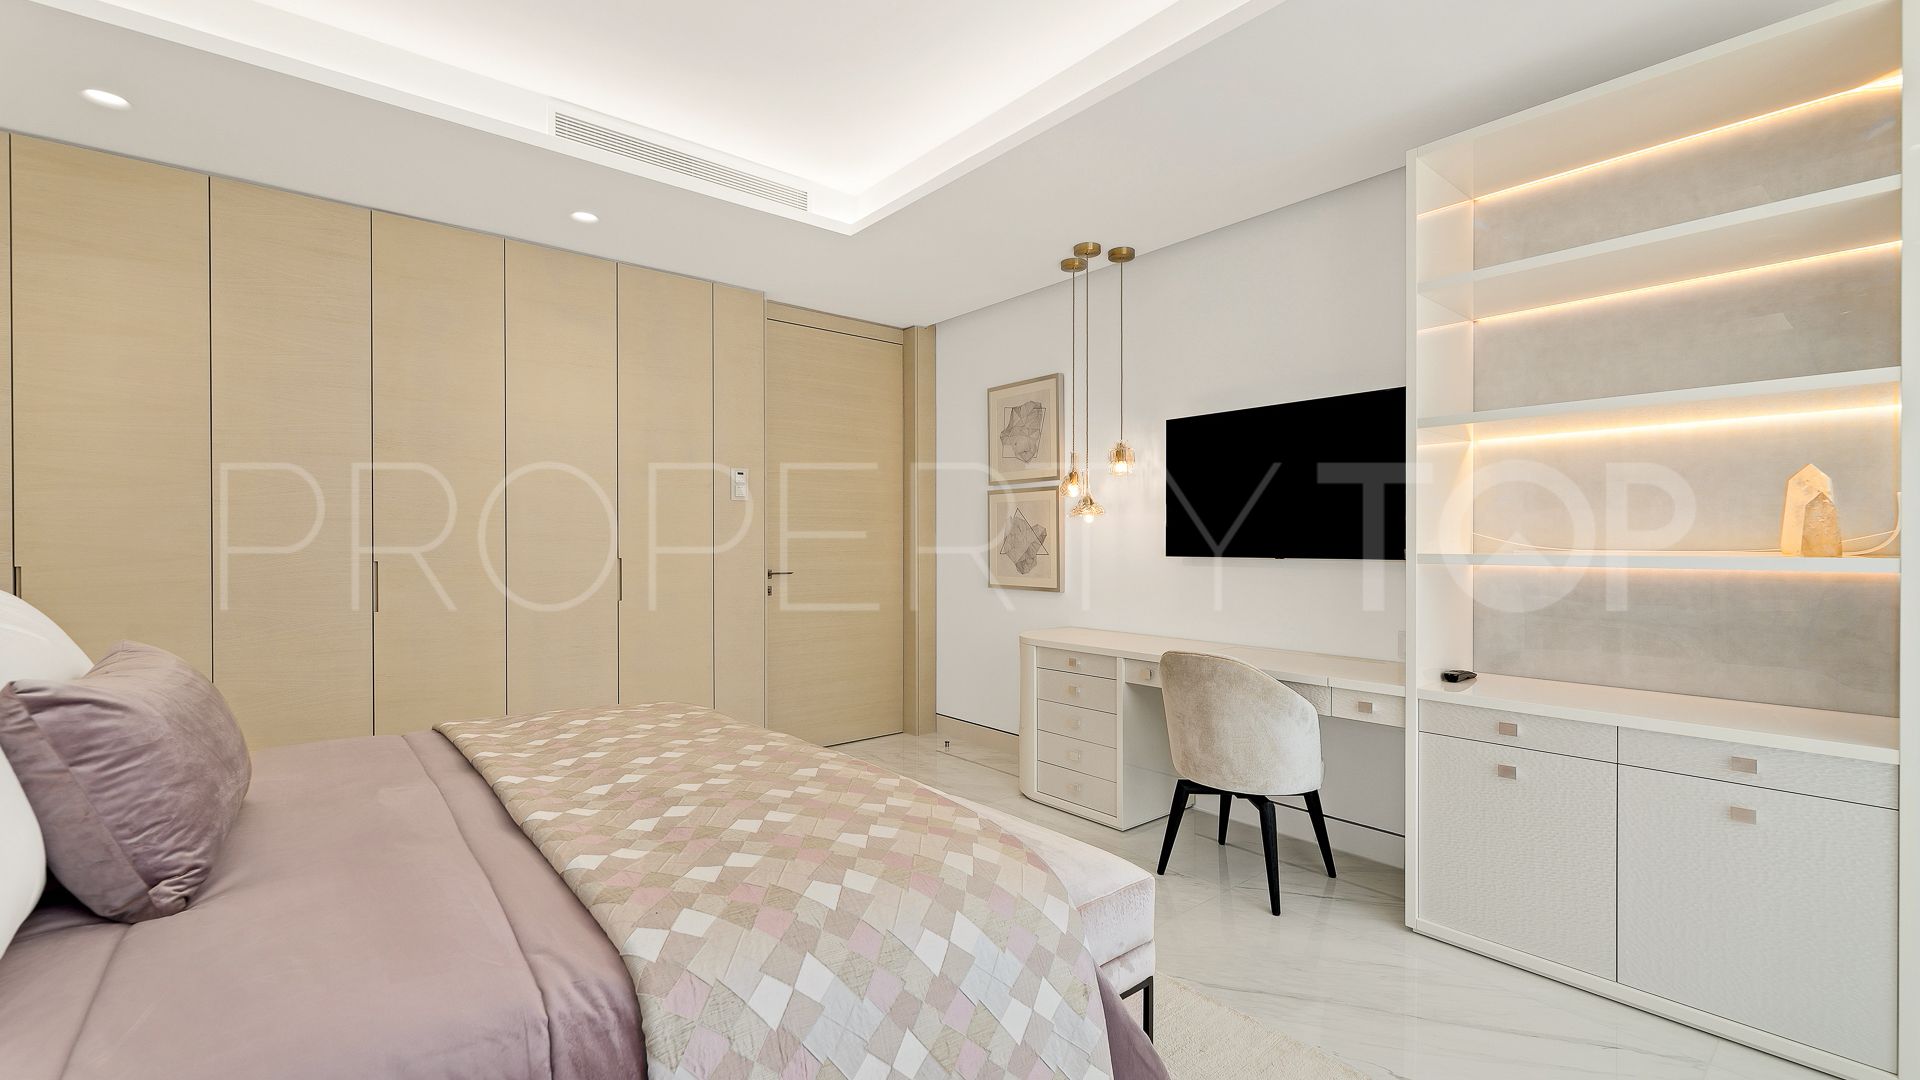 Emare duplex penthouse for sale